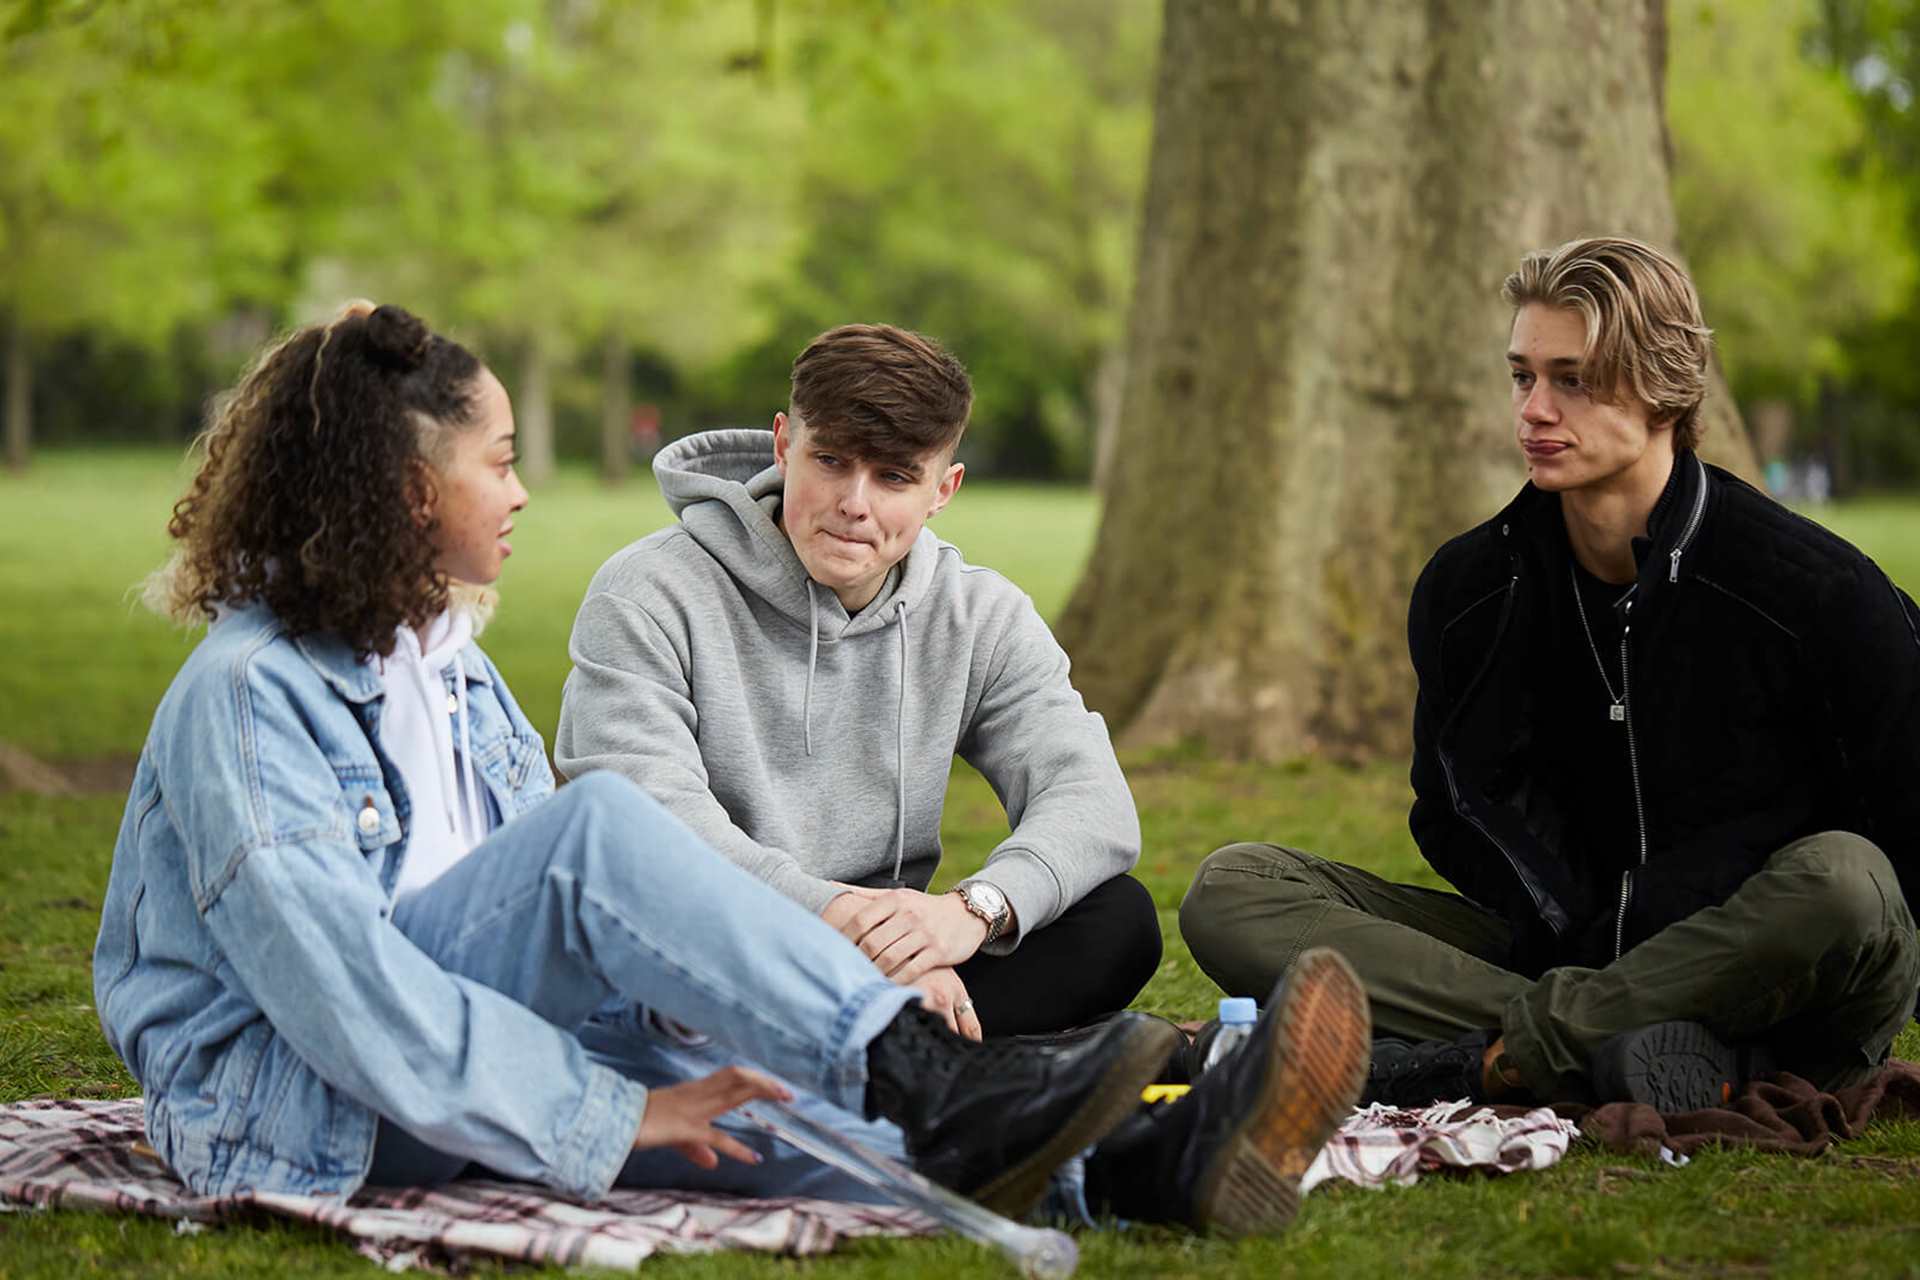 wide-shot-of-three-young-people-sitting-on-the-ground-together-talking-to-each-other-and-listening-with-trees-on-their-background